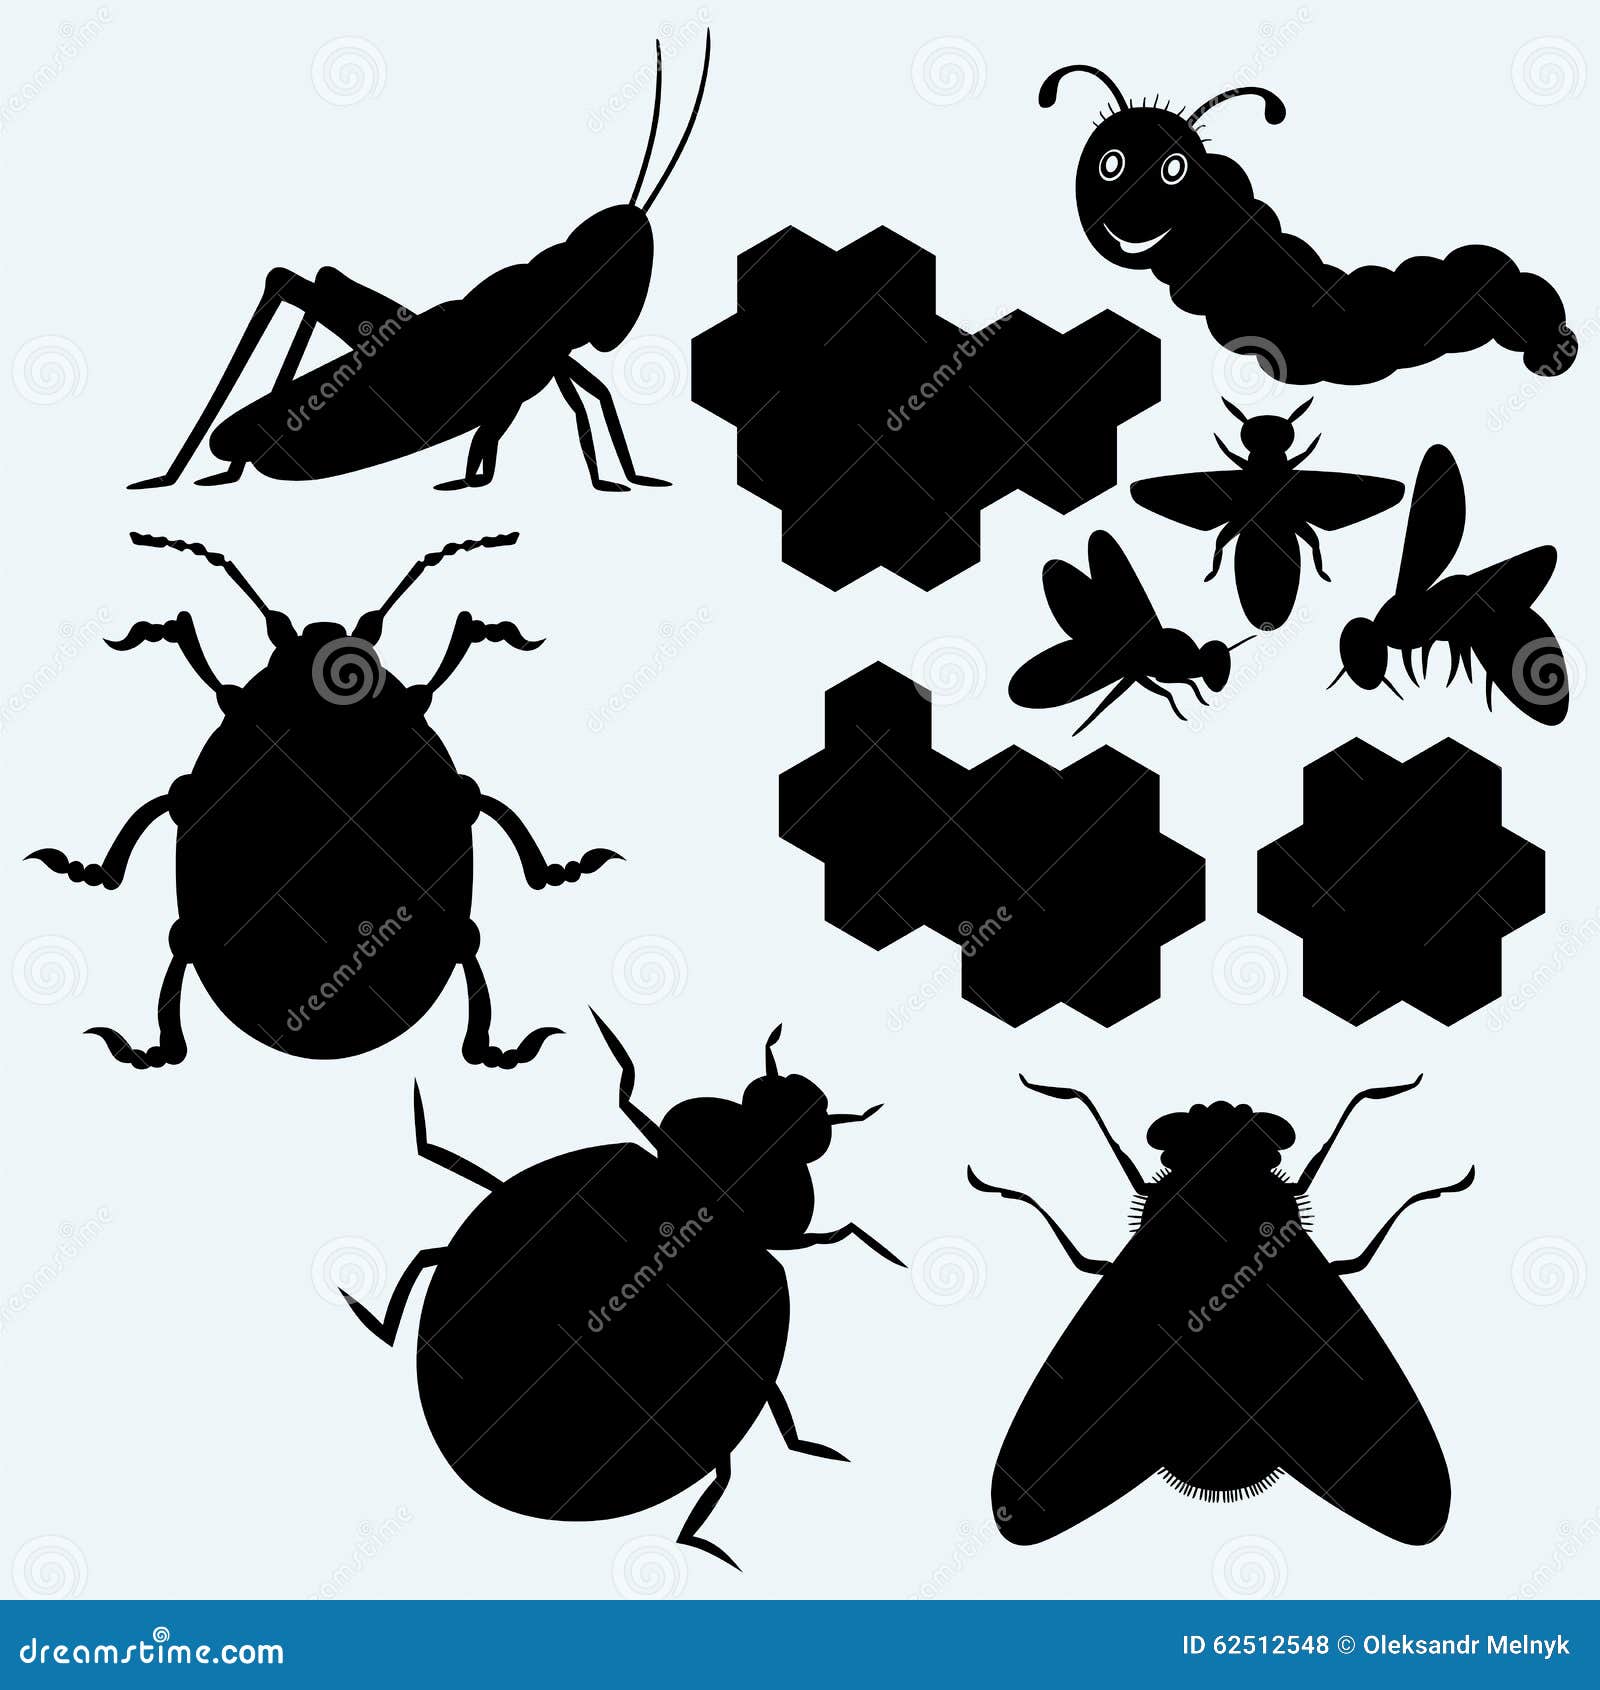 species of insects